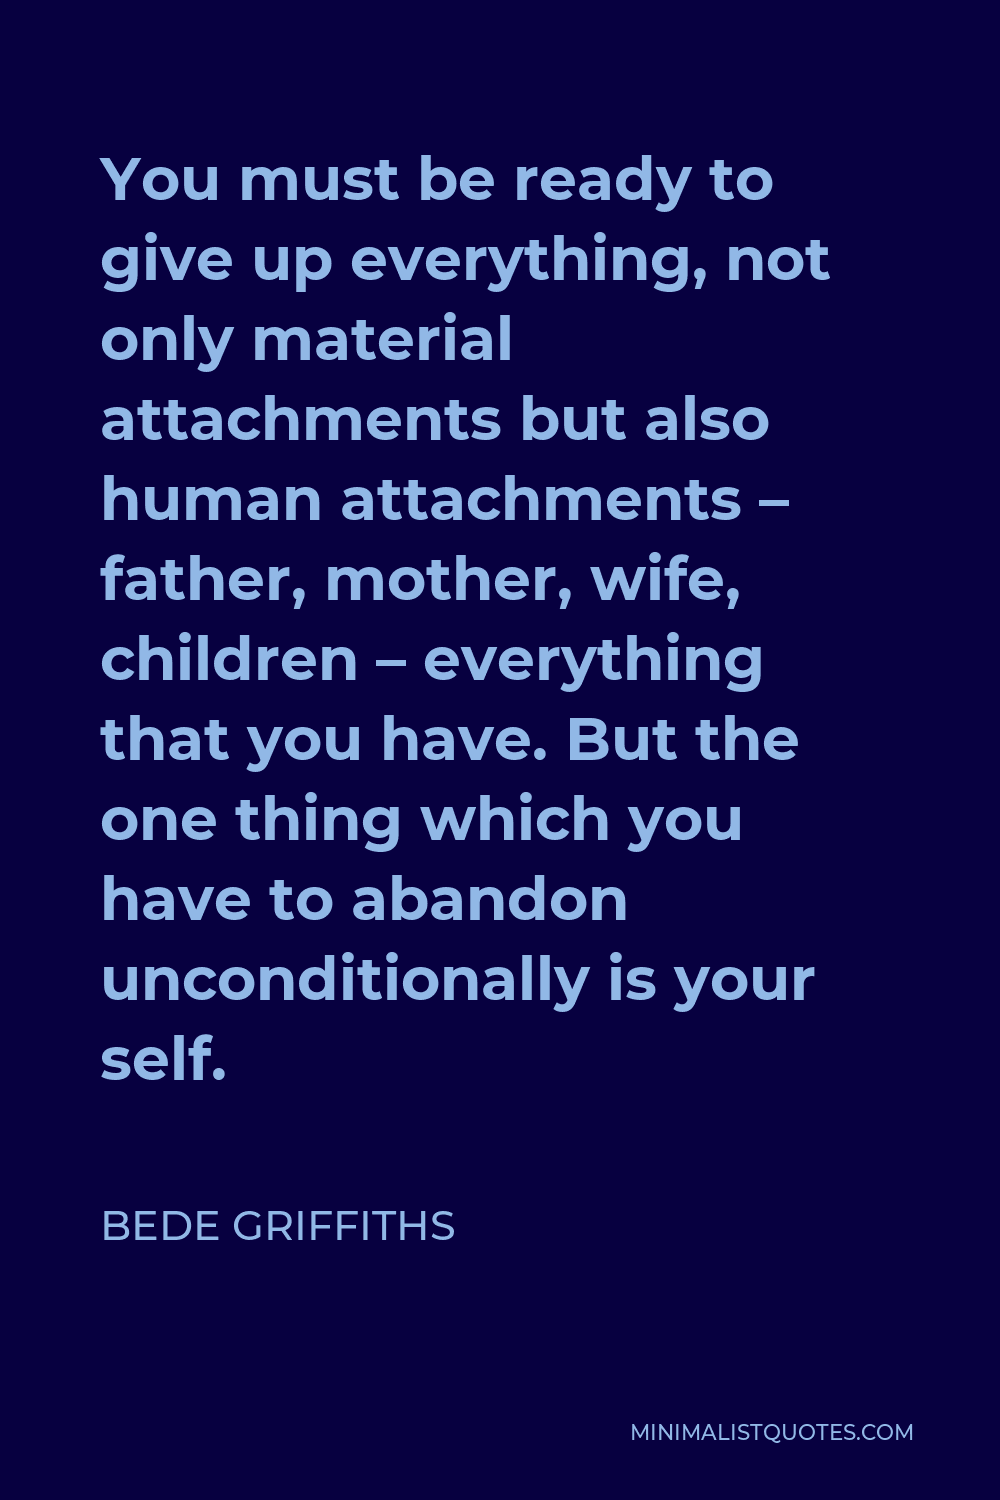 Bede Griffiths Quote - You must be ready to give up everything, not only material attachments but also human attachments – father, mother, wife, children – everything that you have. But the one thing which you have to abandon unconditionally is your self.